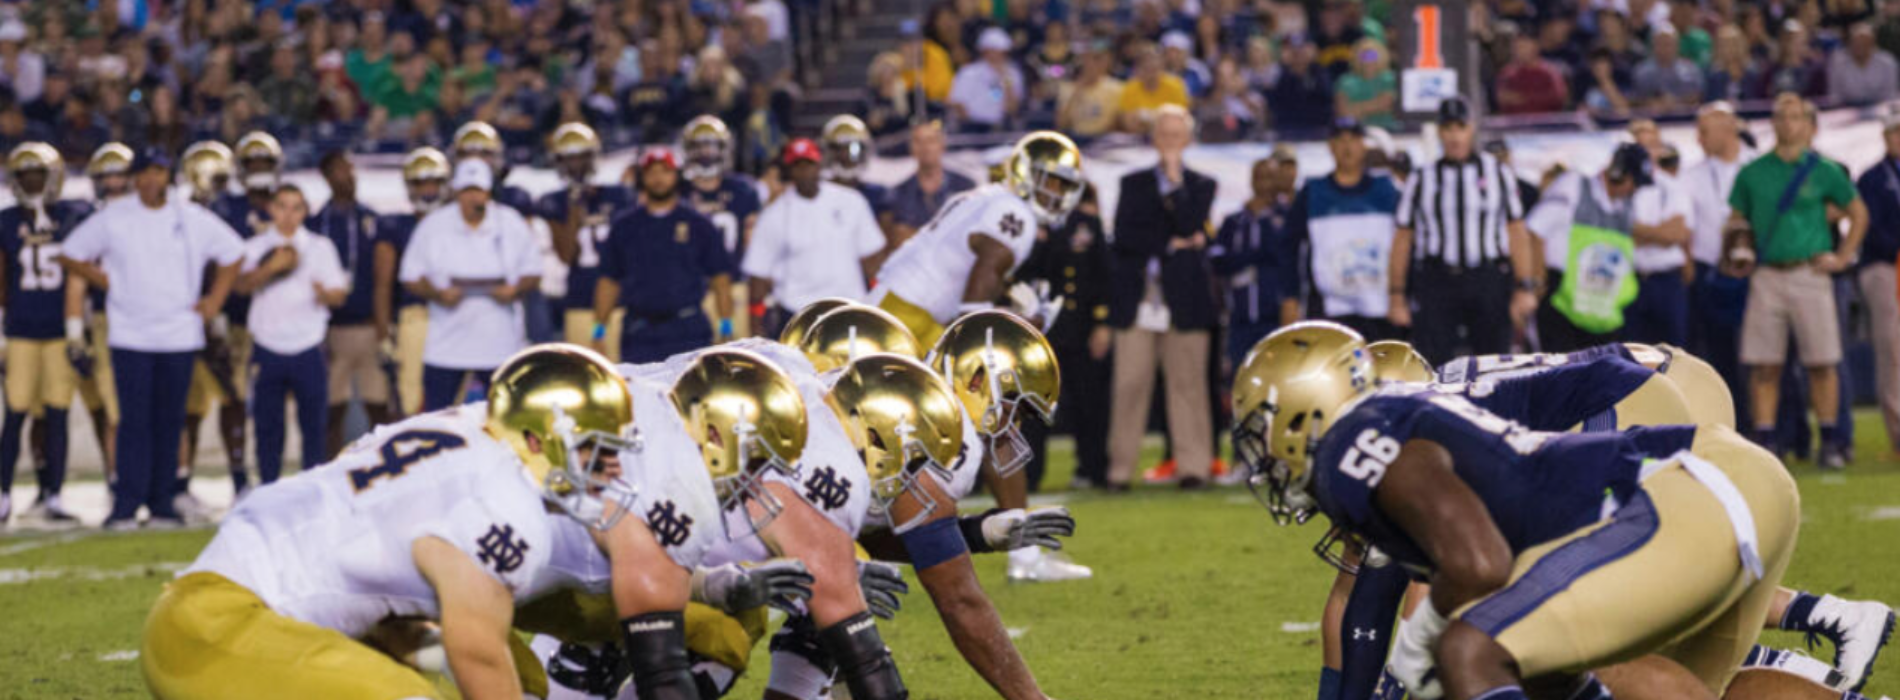 2020 Navy-Notre Dame Football Game To Be Played in Annapolis